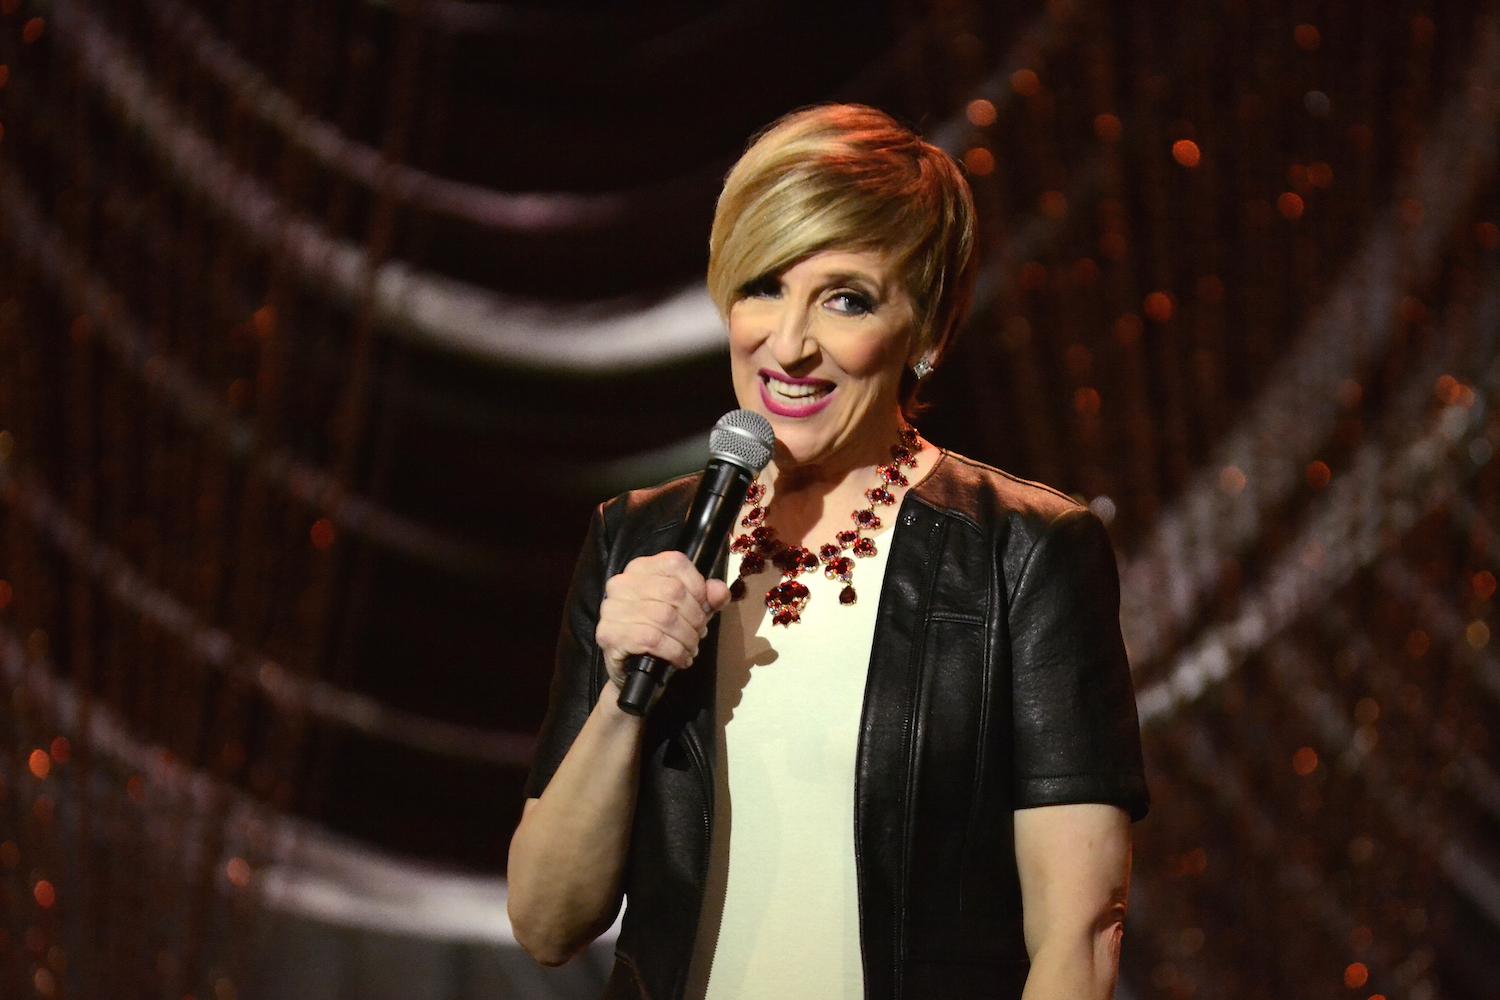 Comedienne Lisa Lampanelli On Trump, Cosby, Amy Shumer & Being ‘The Queen Of Mean’